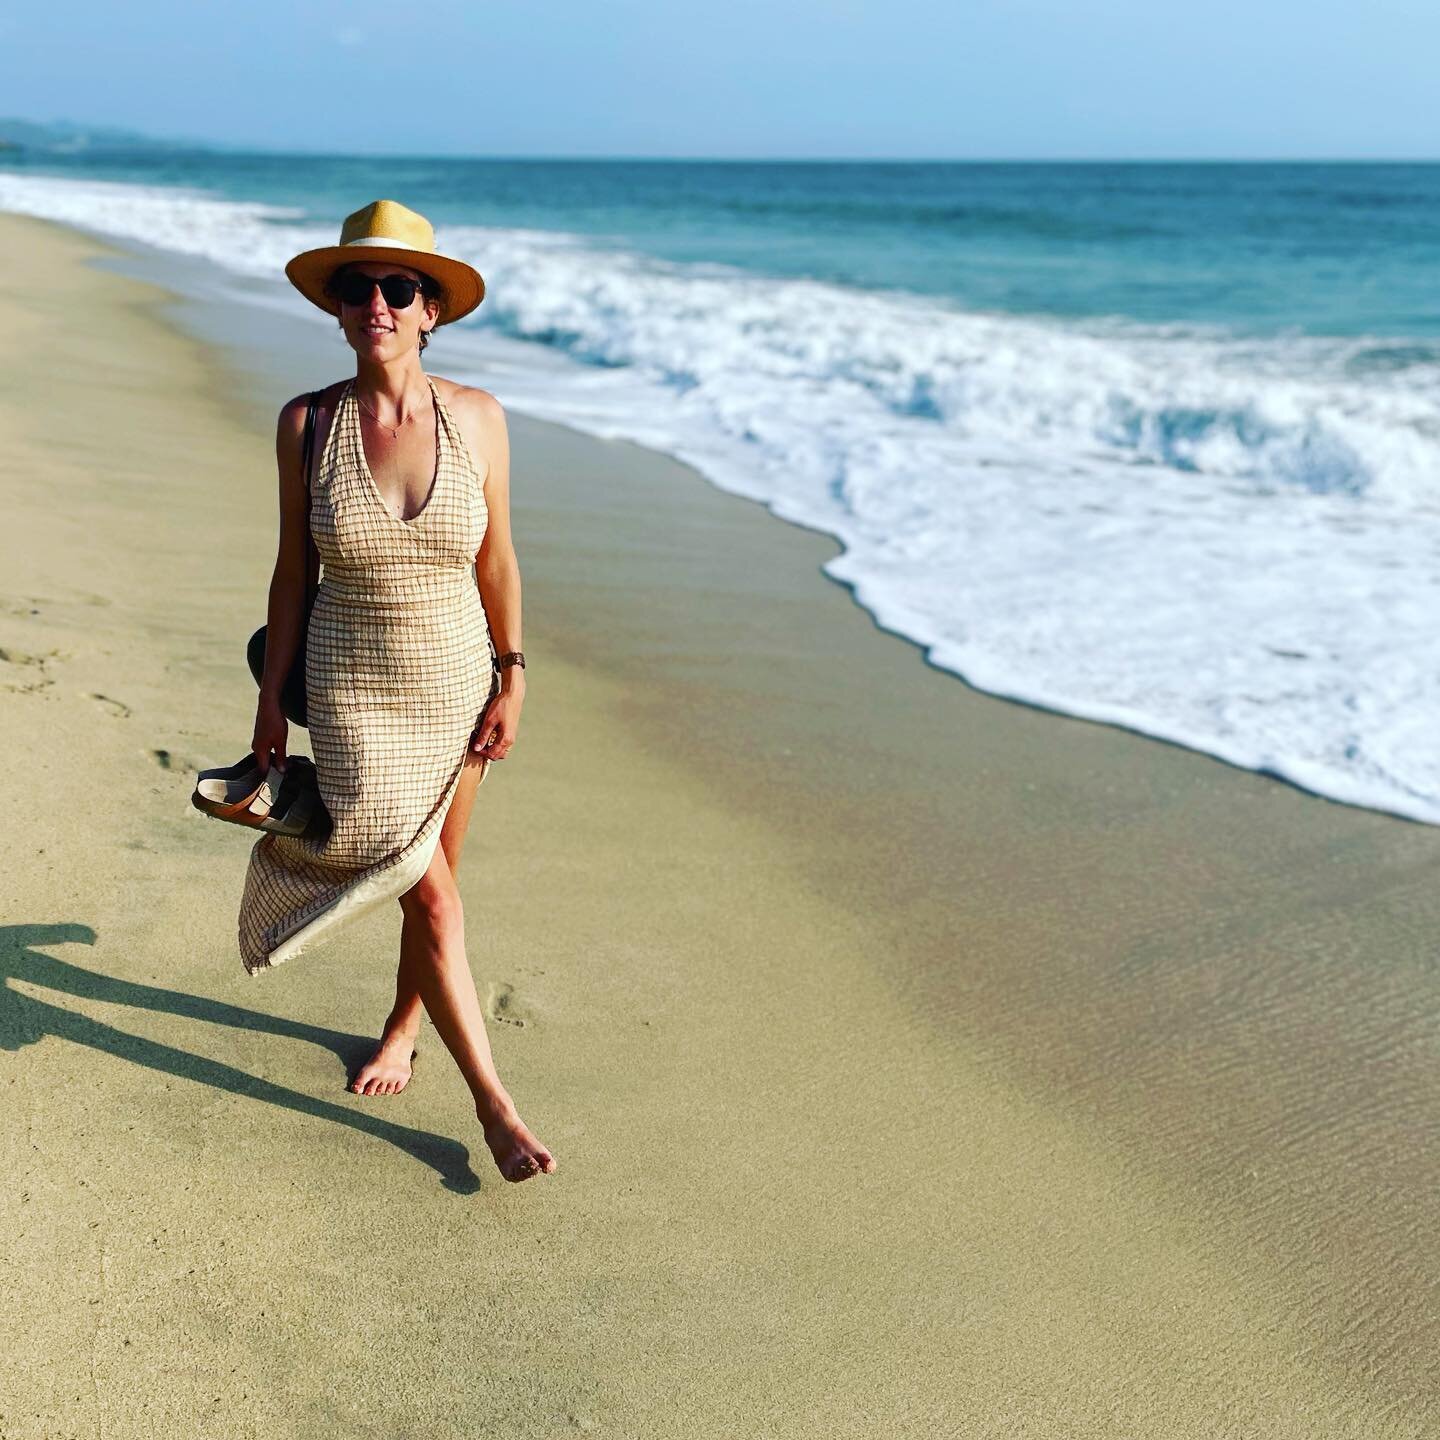 A walk on the beach is very healing. The ocean surf is full of negative ions, which are actually oxygen atoms with extra negatively charged electrons that purify the blood, enhance immune function, neutralize free radicals, and revitalize cell metabo